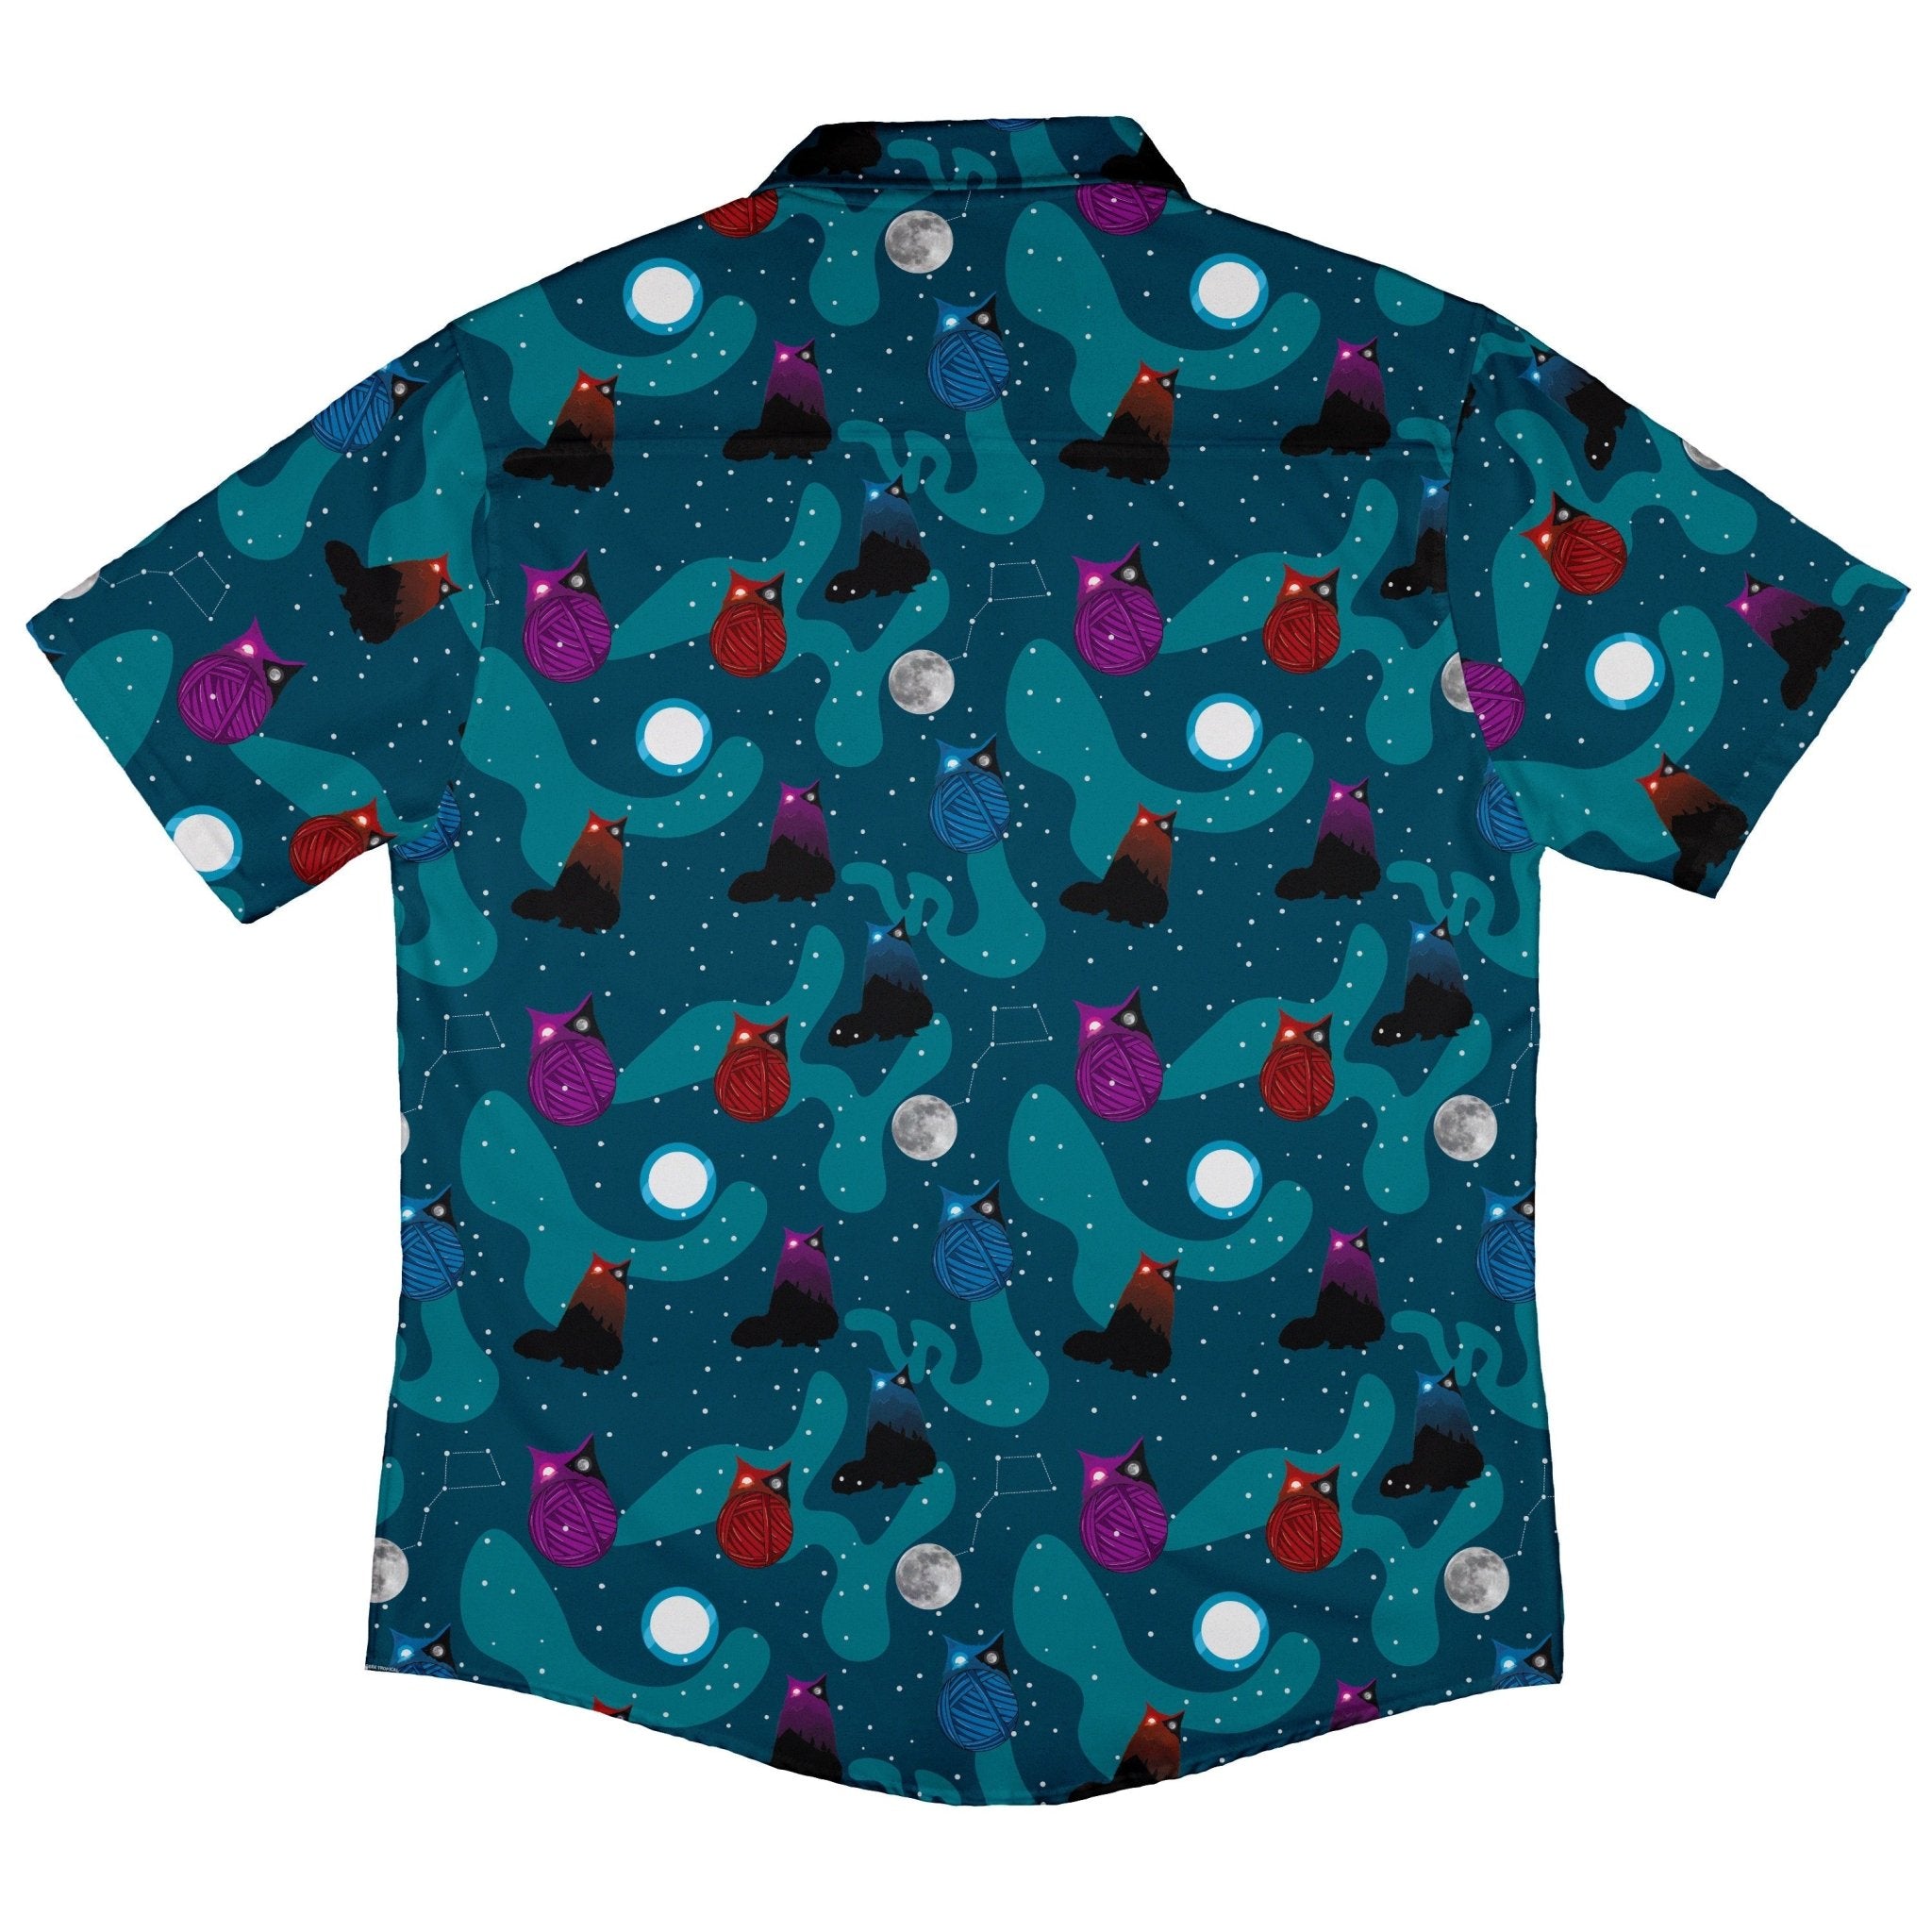 Exploding Kittens Day and Night Sky Cats Button Up Shirt - adult sizing - Animal Patterns - board game print